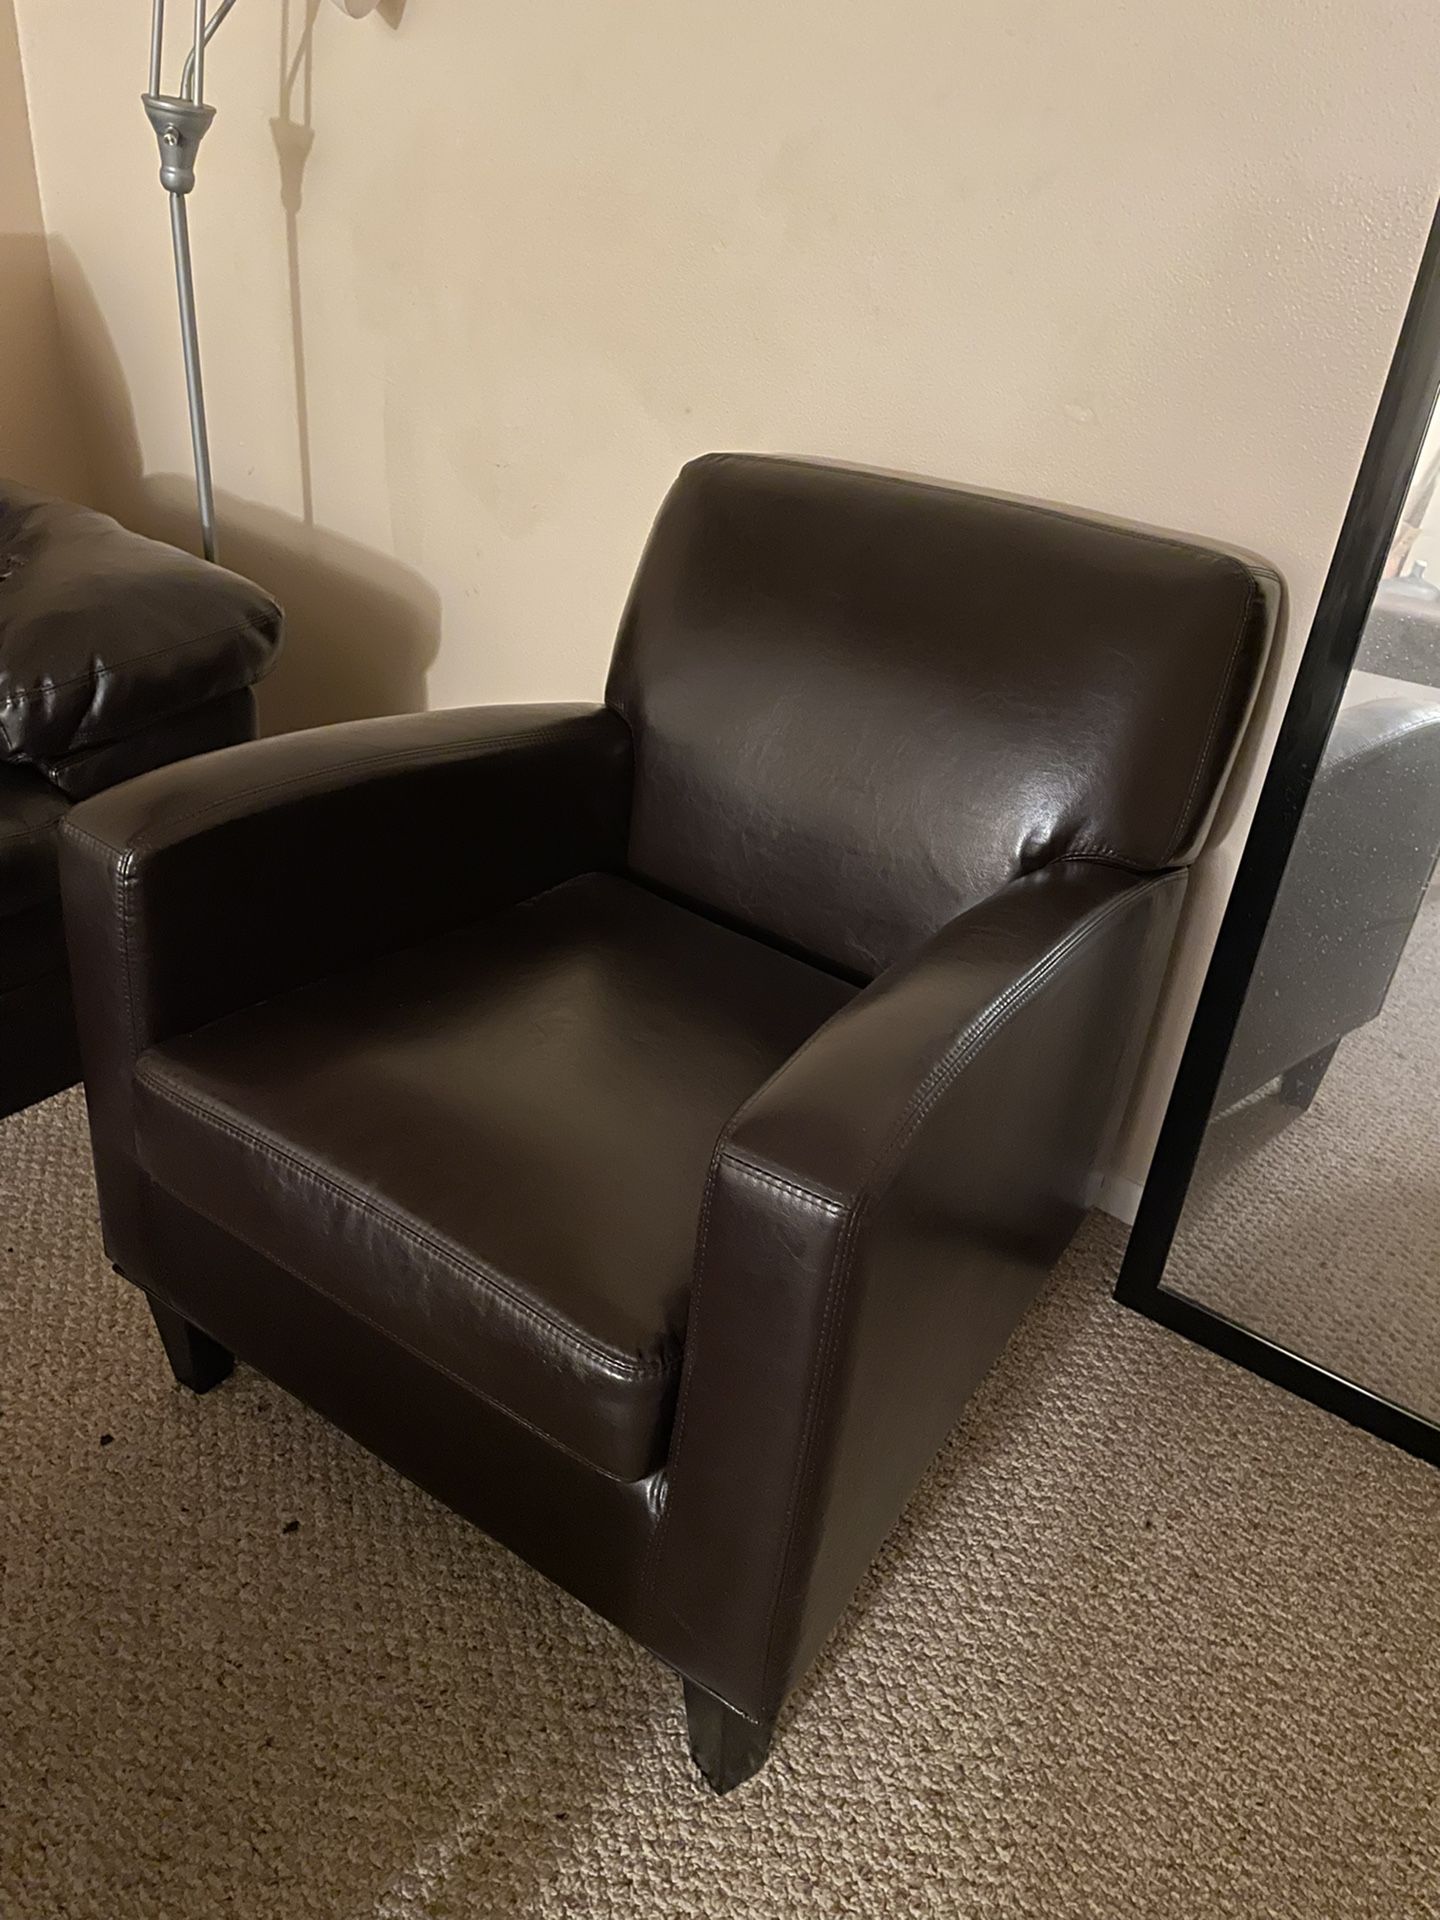 Single Couch - $35 - Pick Up Only in Winter Park